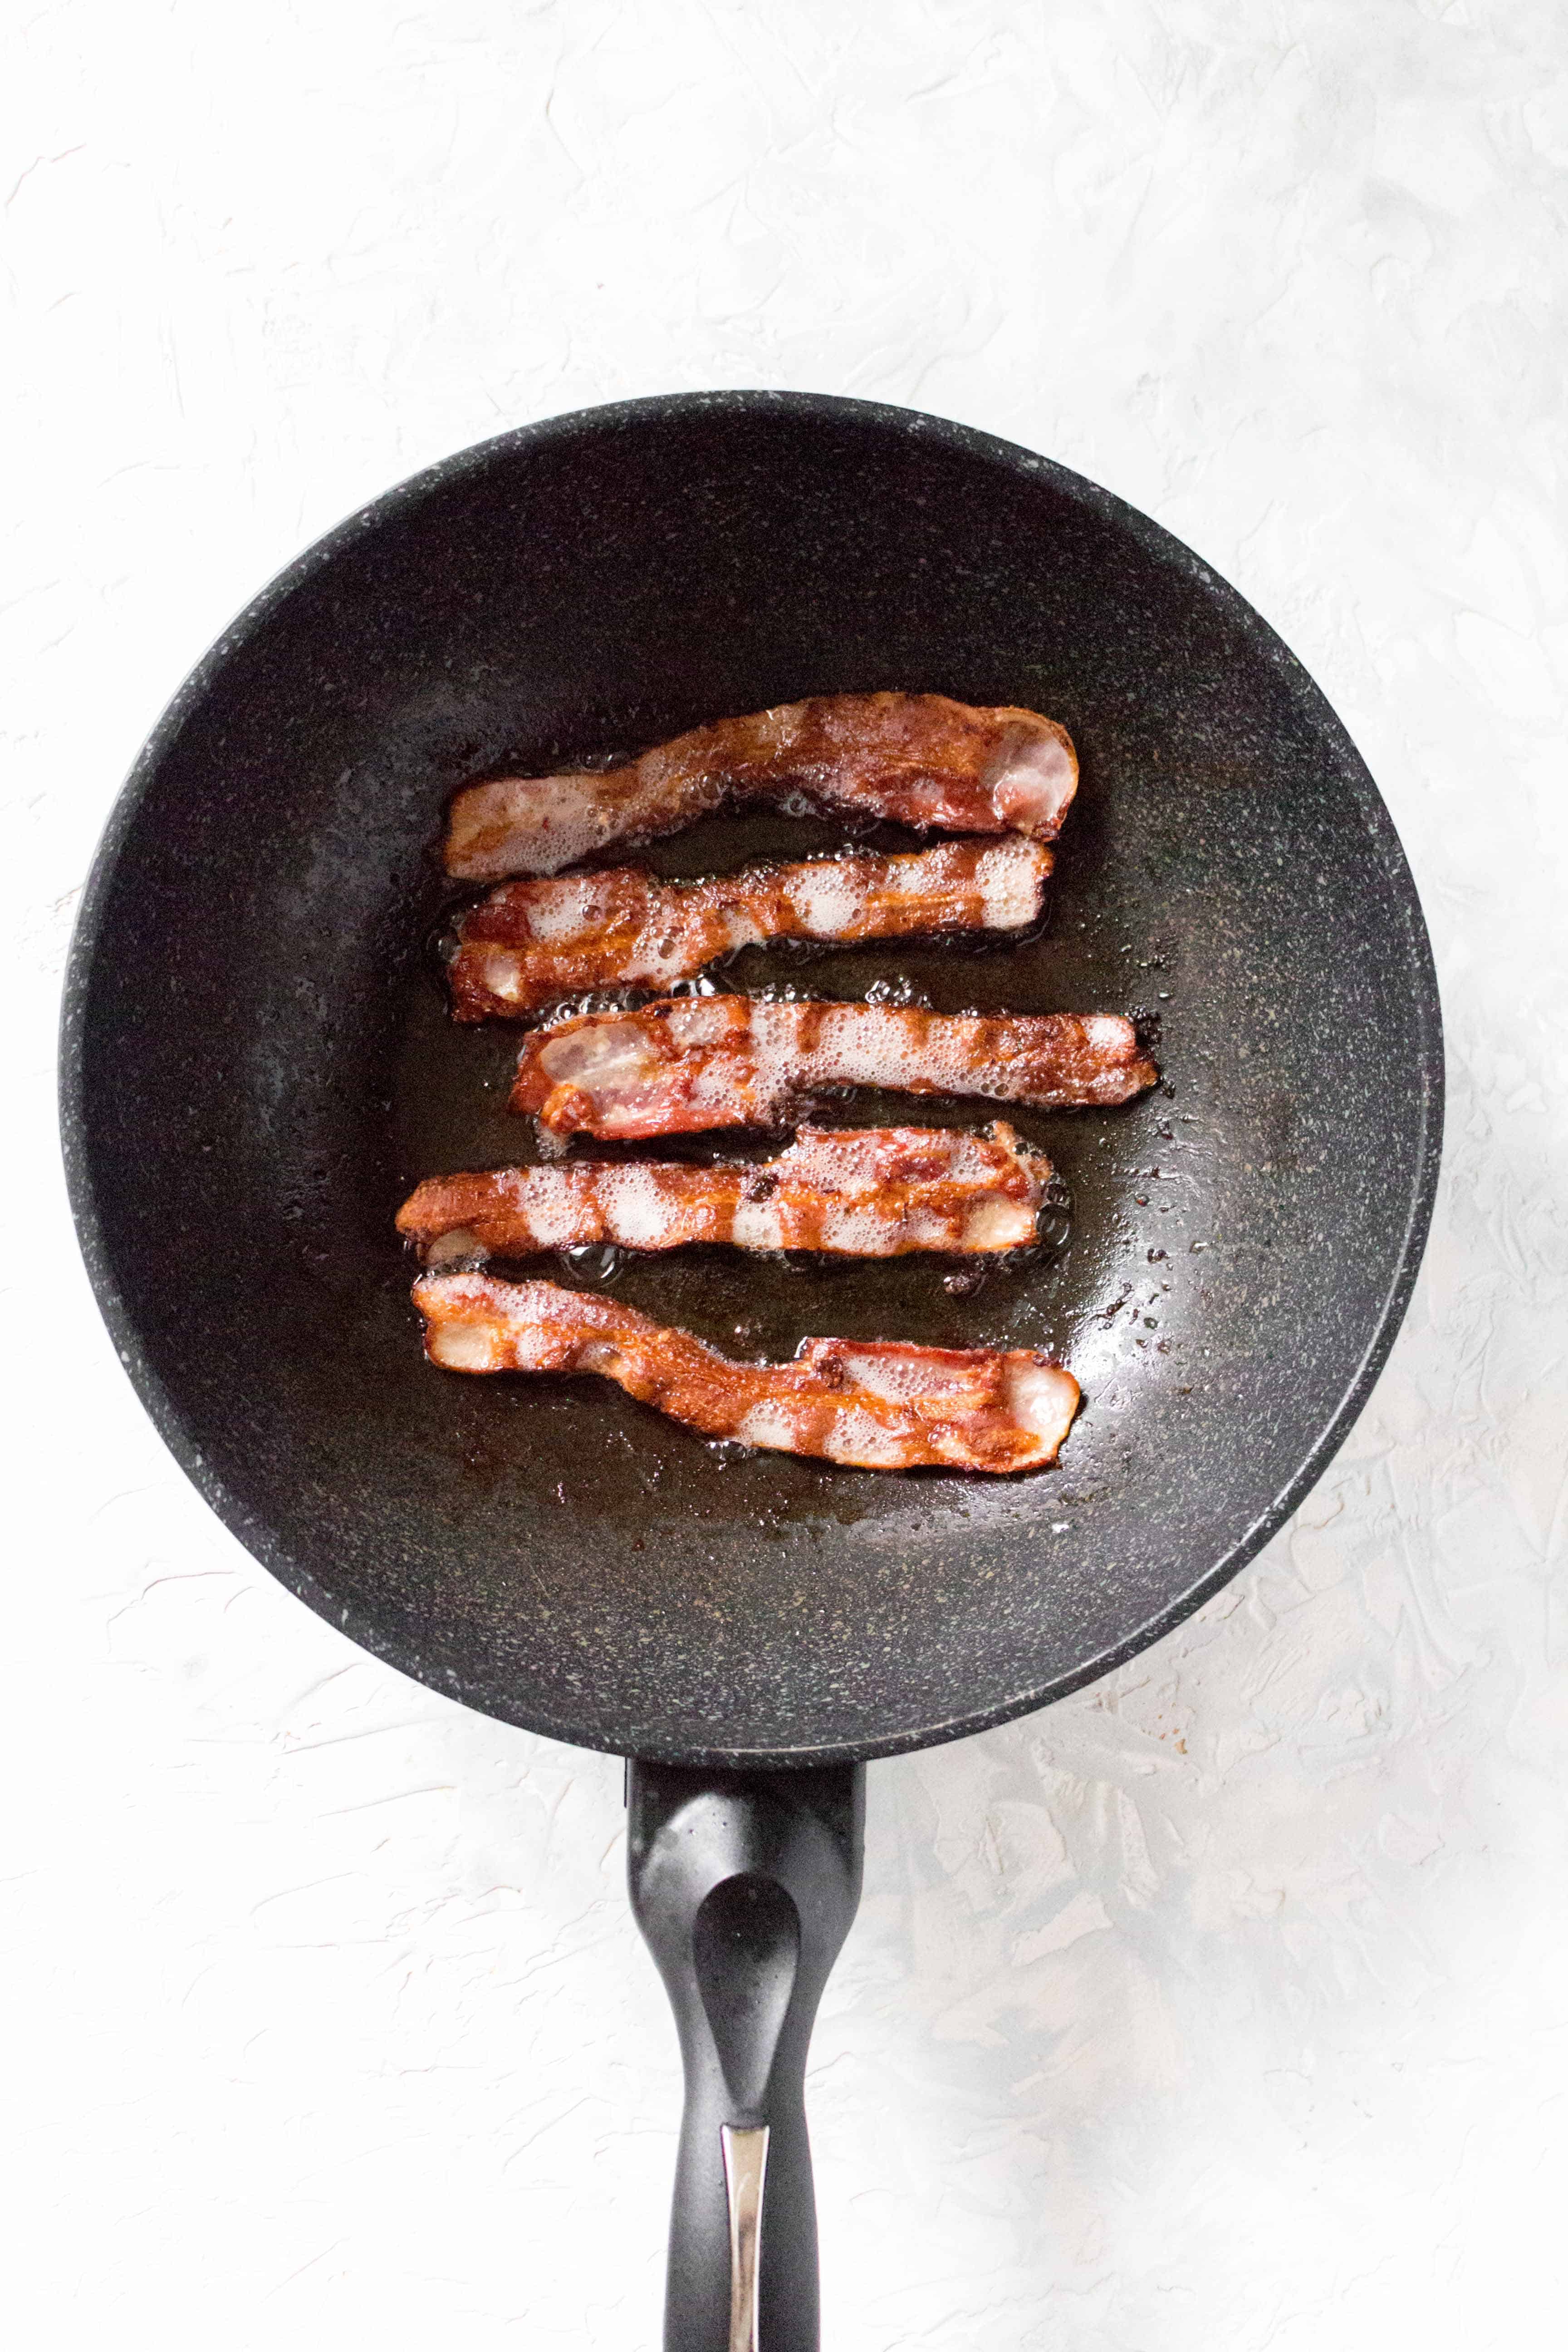 In a large skillet on medium heat, cook your bacon until it is at the level of crispiness you desire. When done, set the bacon aside, do not drain the bacon fat.